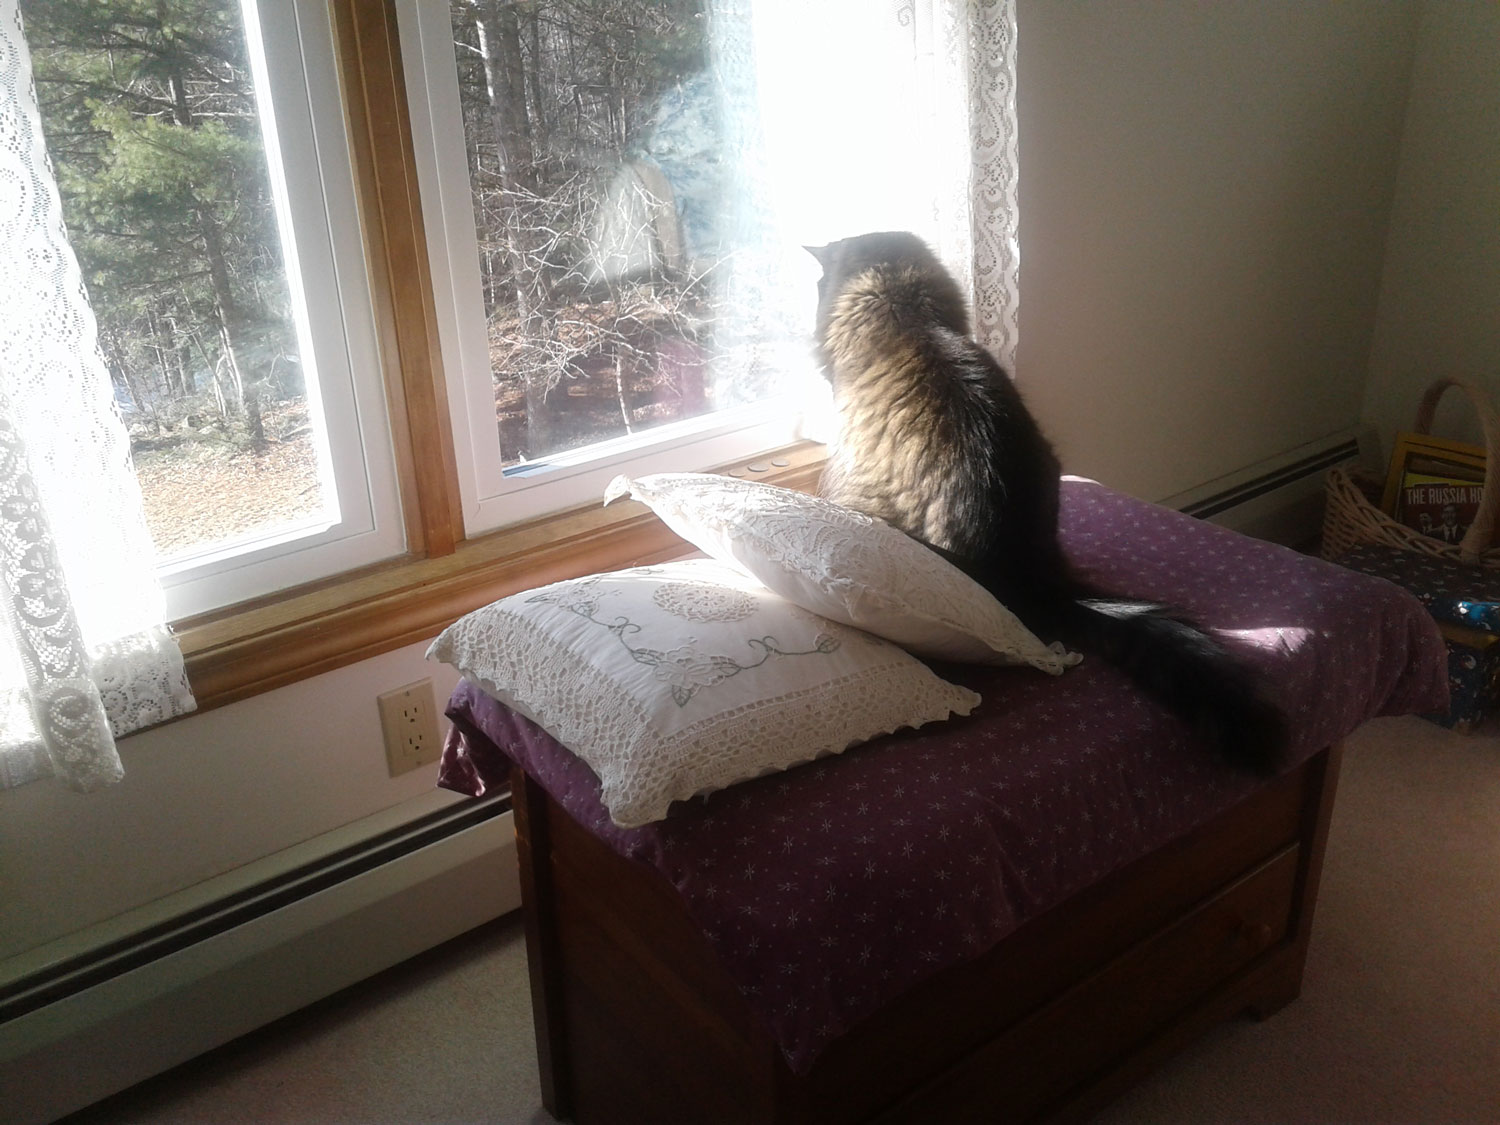 Meet Sam. Marianne M. sent pics of her handsome, grey, green-eyed cat Sam, hanging out on his favorite blanket chest, alternately napping and watching the squirrels and birds outside.